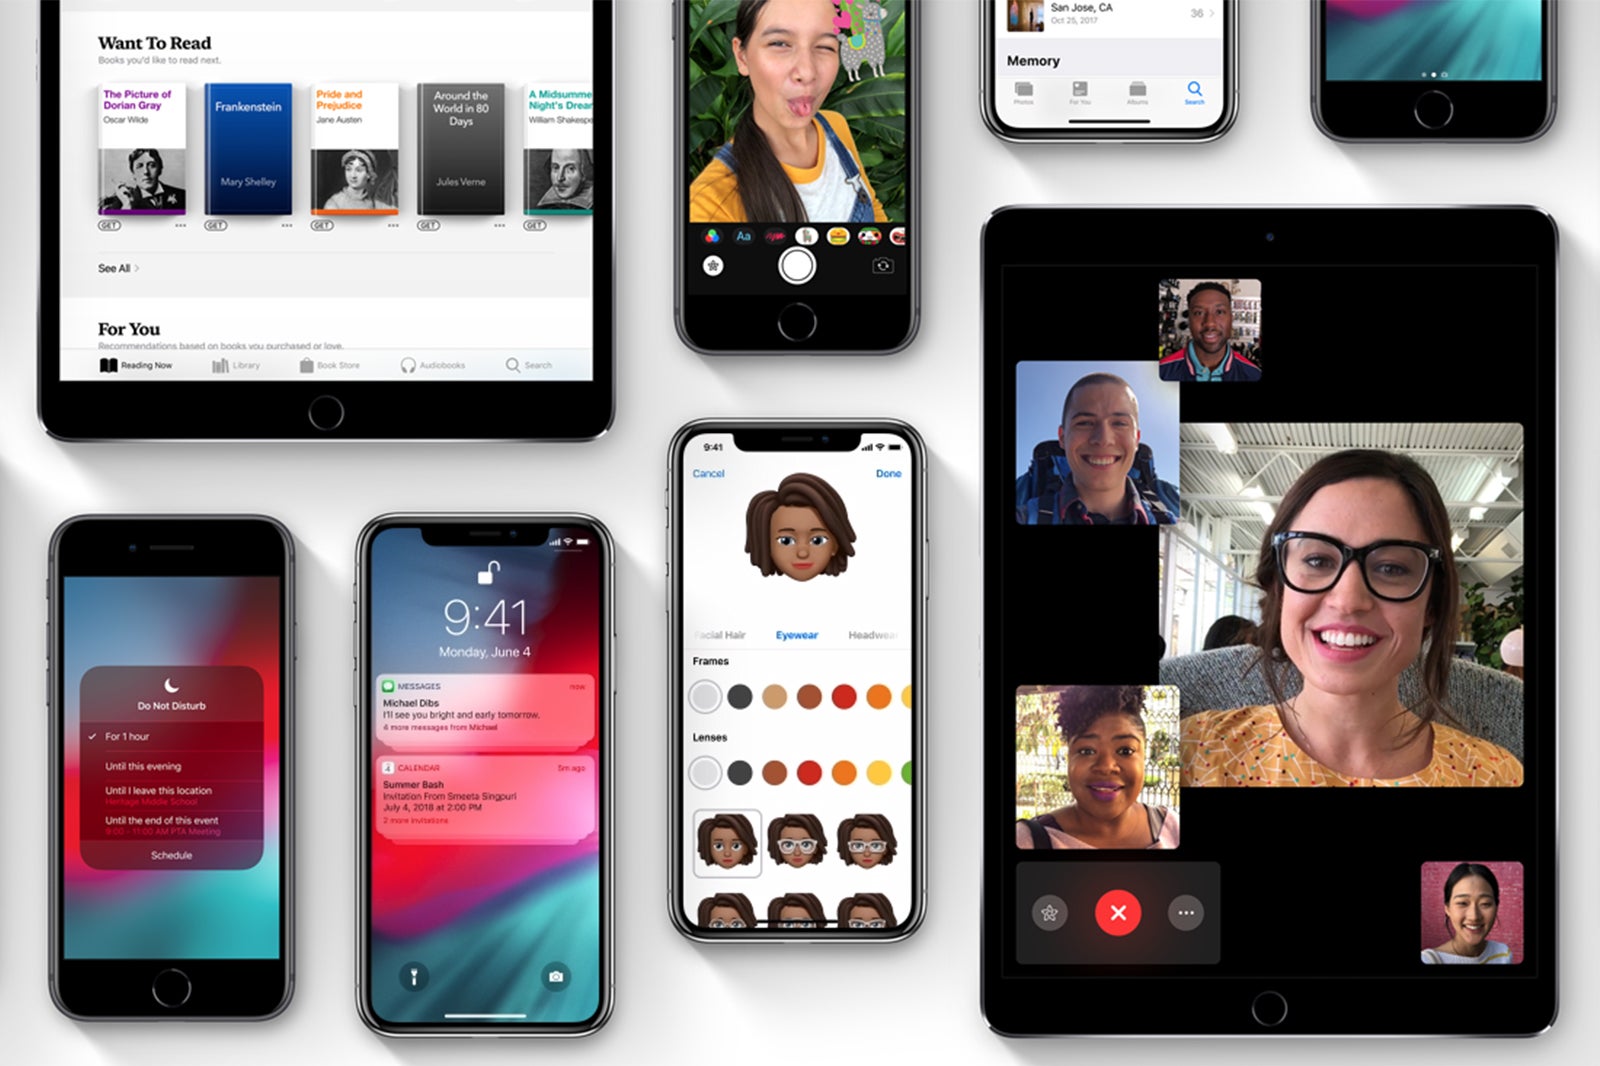 Here's how to download the iOS 12 public beta on your iPhone/iPad and downgrade if needed